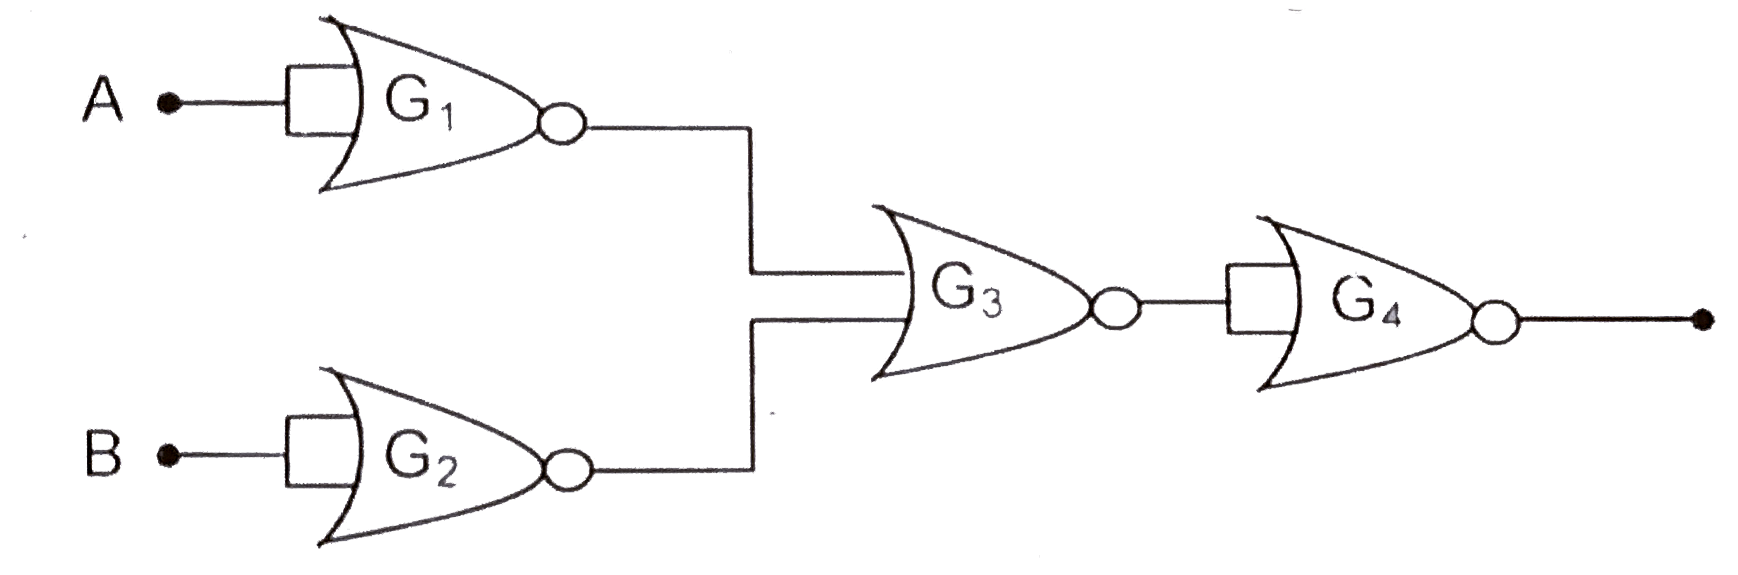 The combination of the gates shown in figure produces